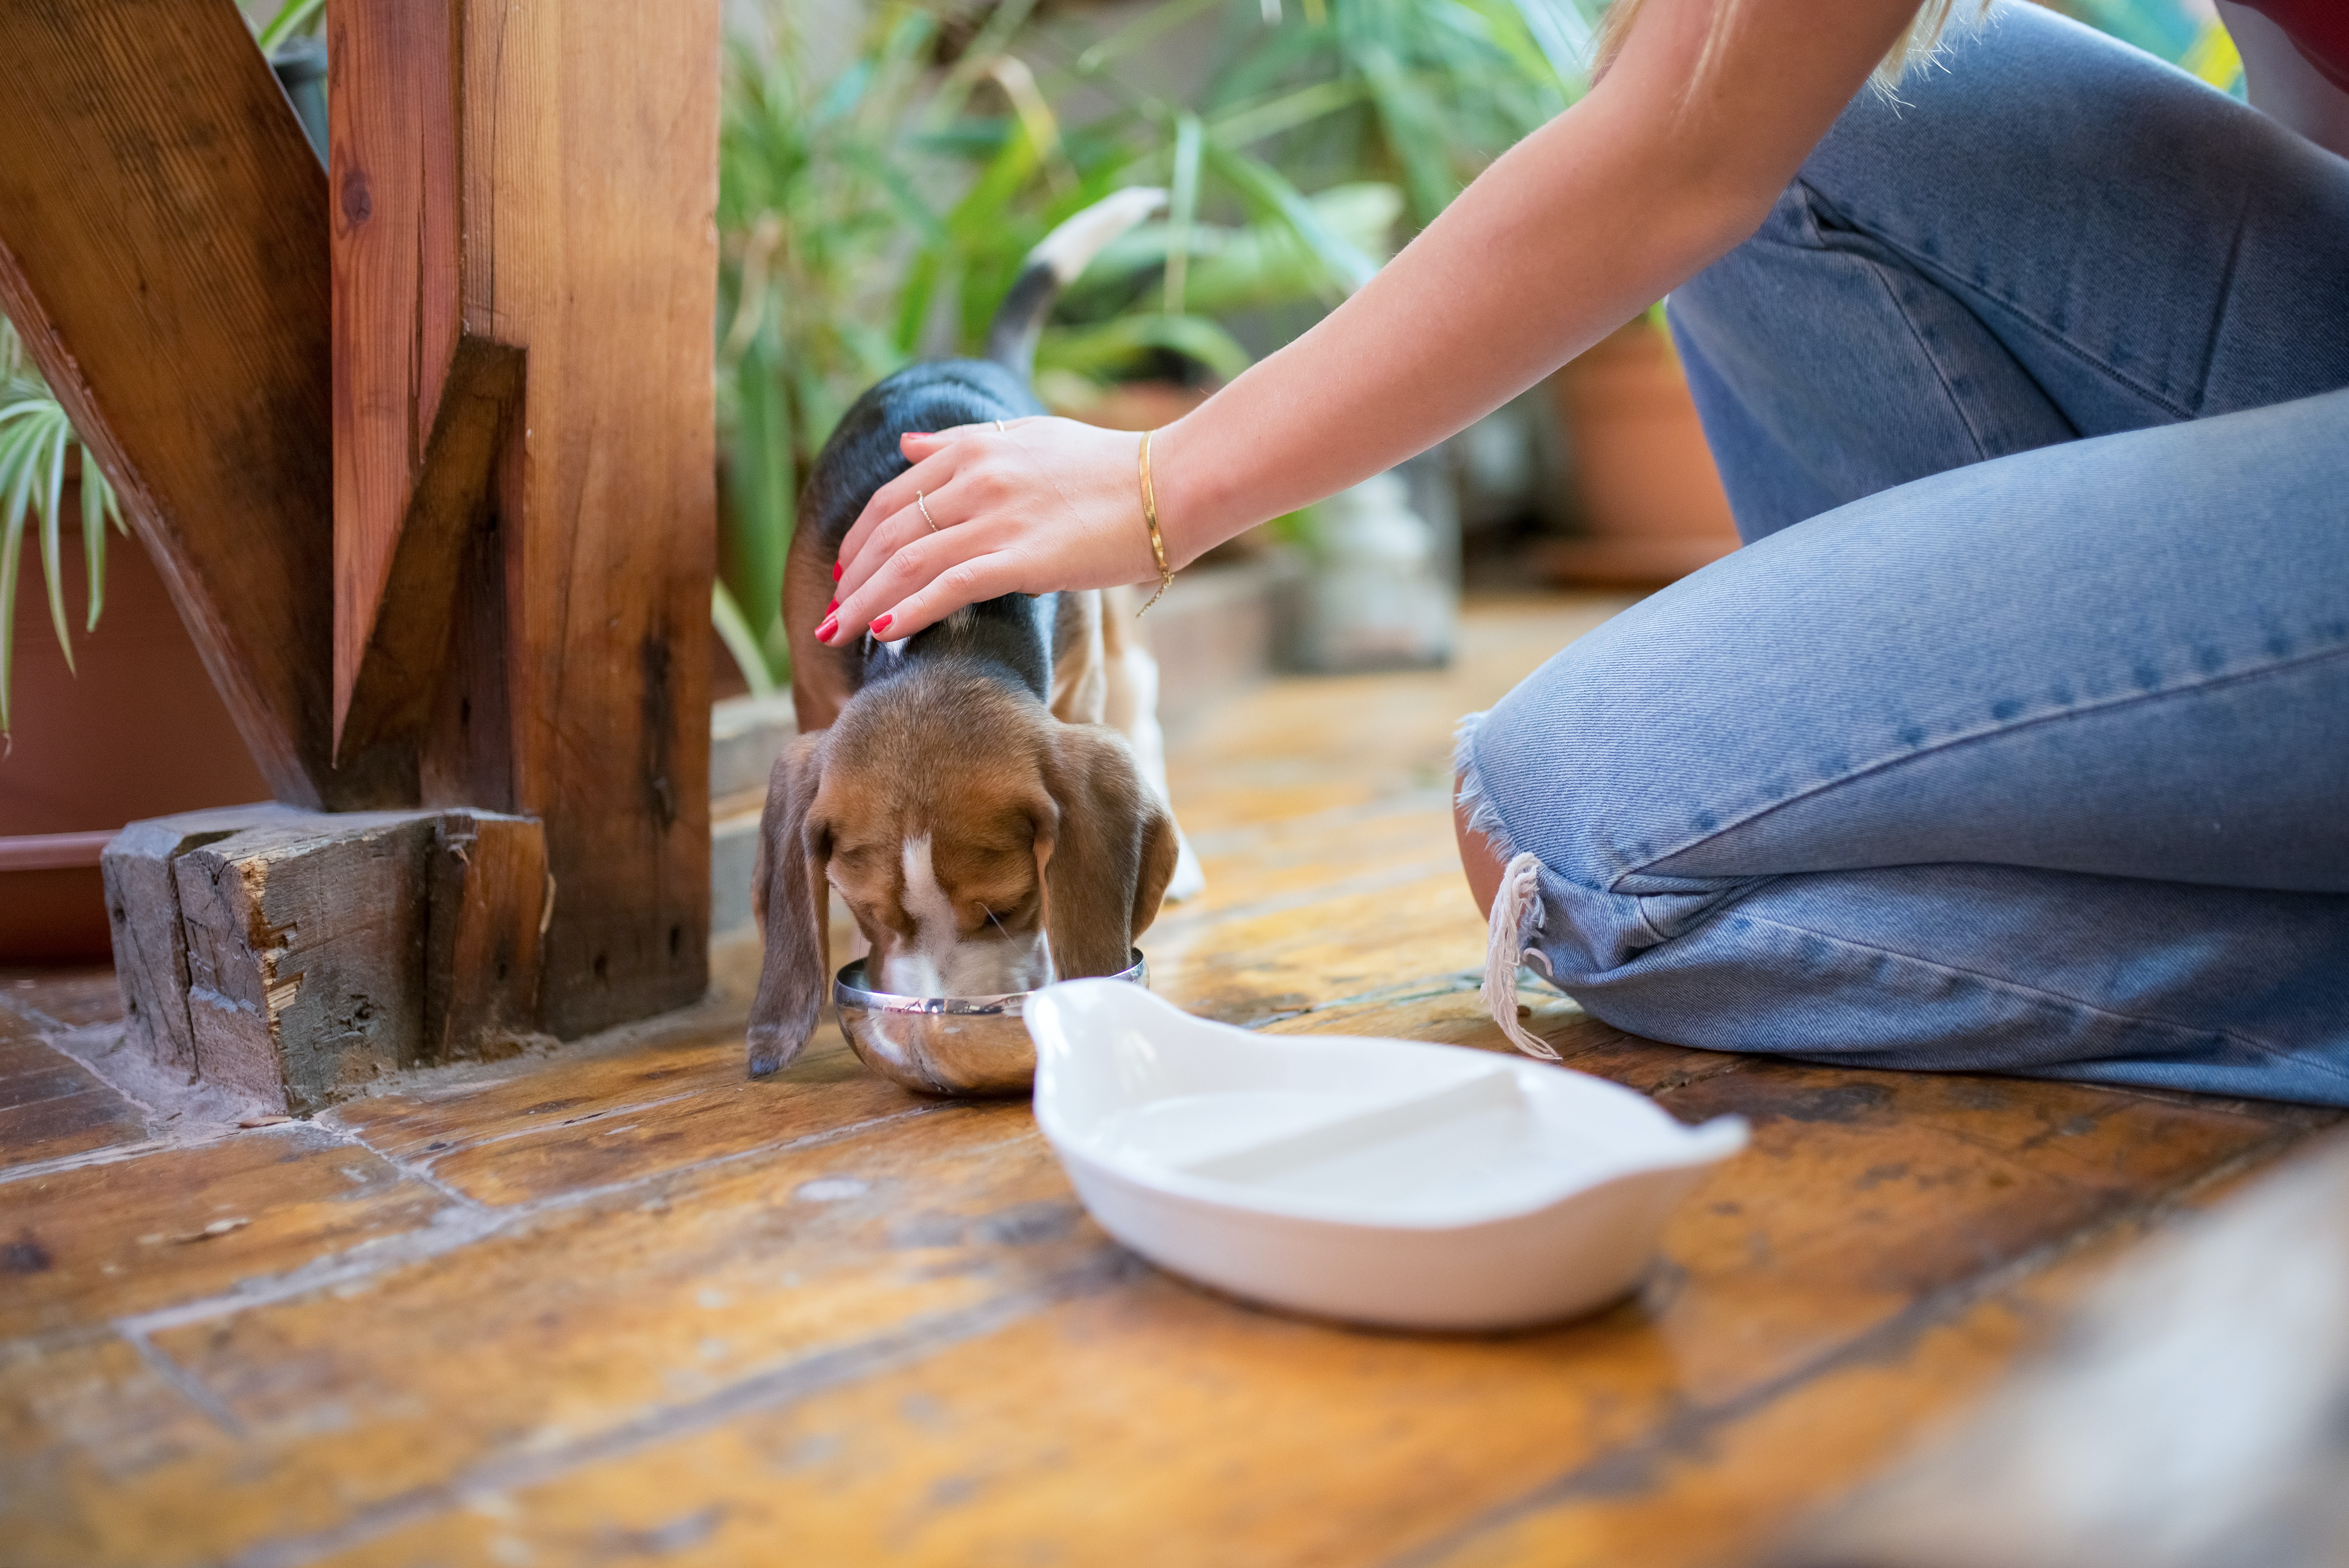 person petting a puppy that is eating from a bowl